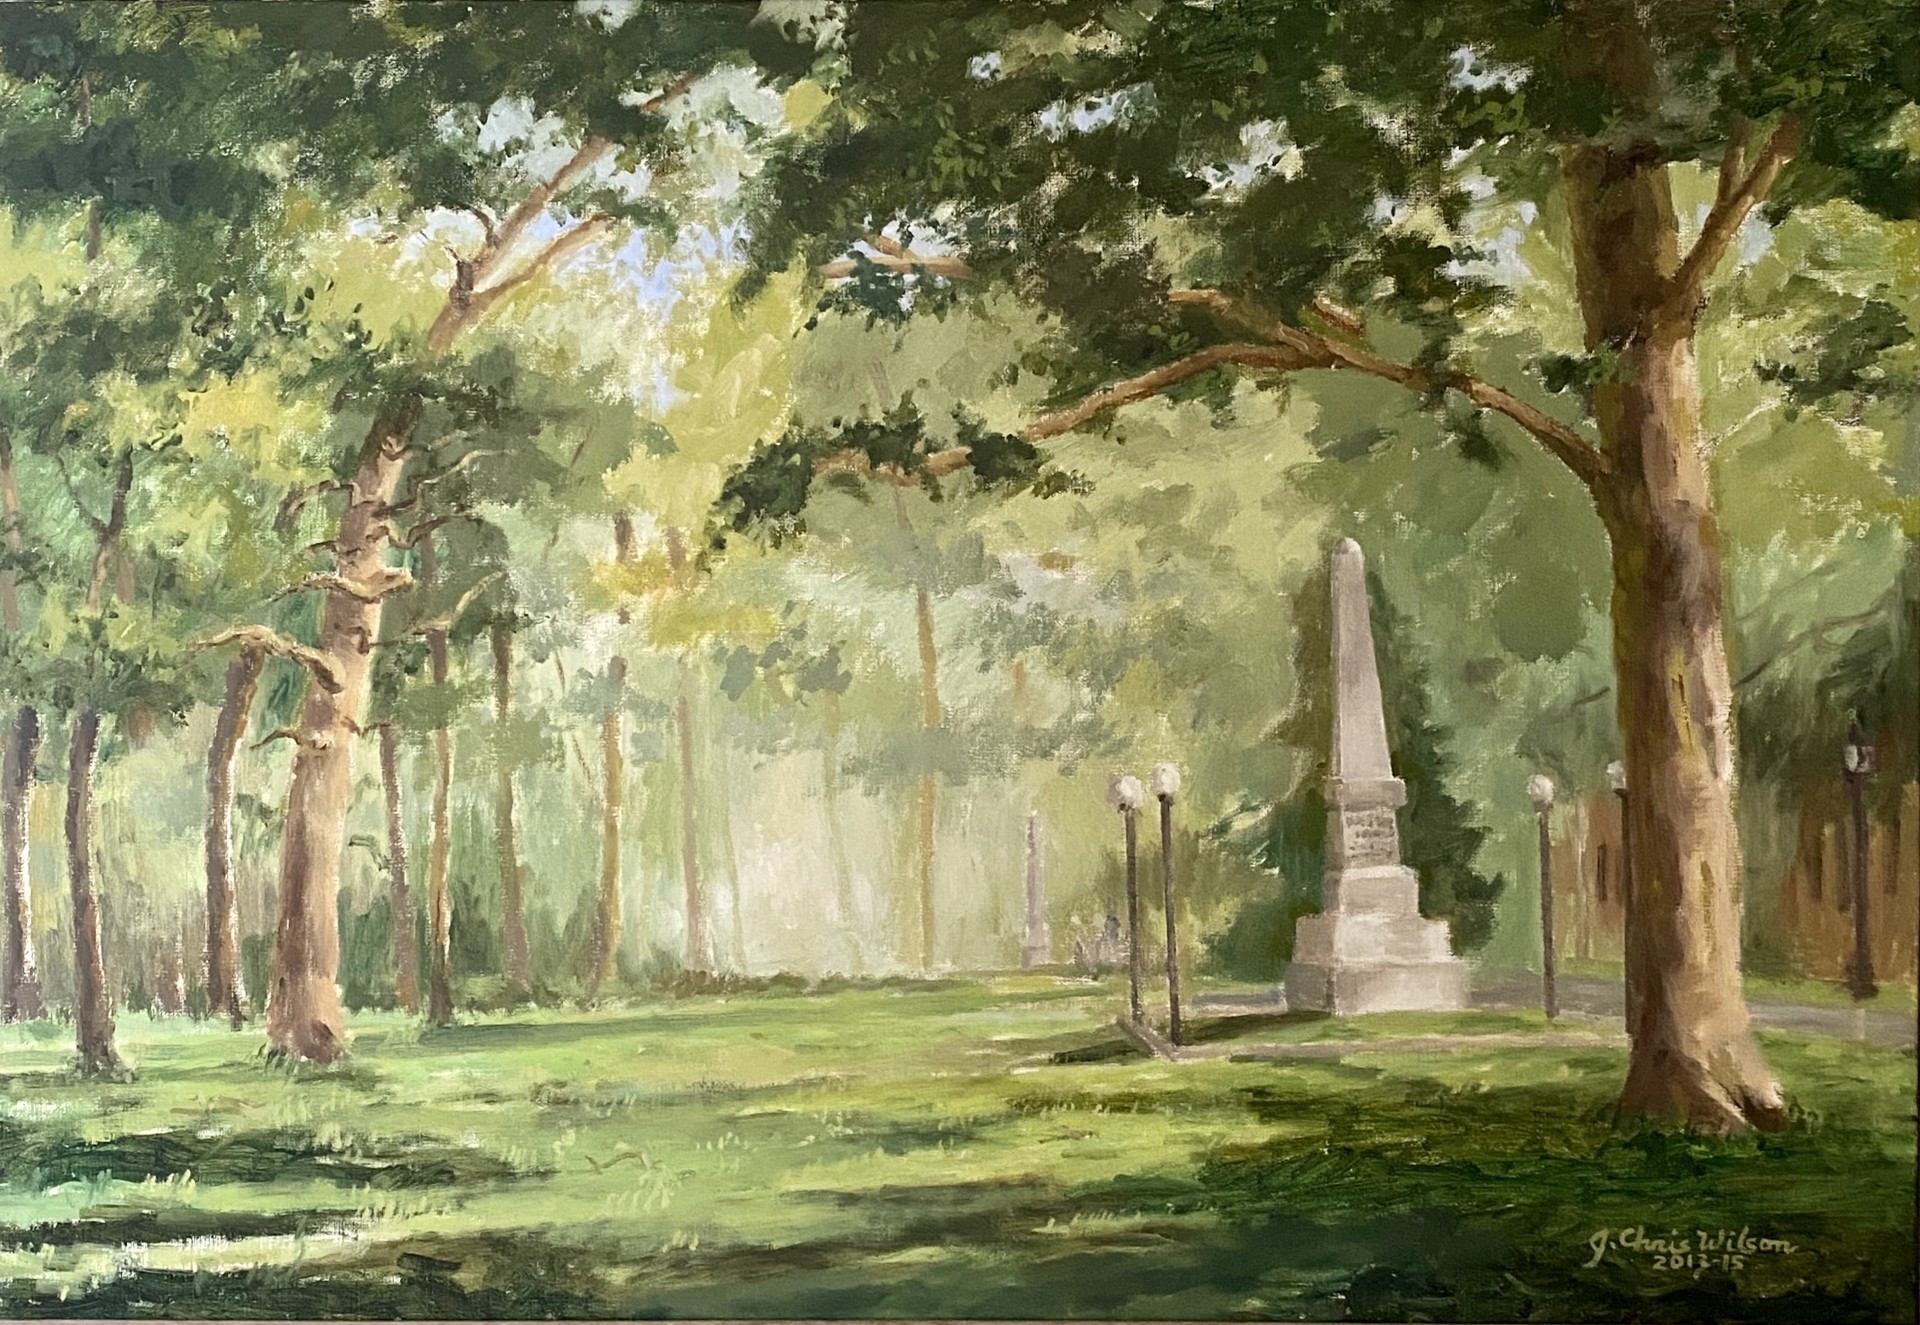 commons edgecombe county with trees and statue